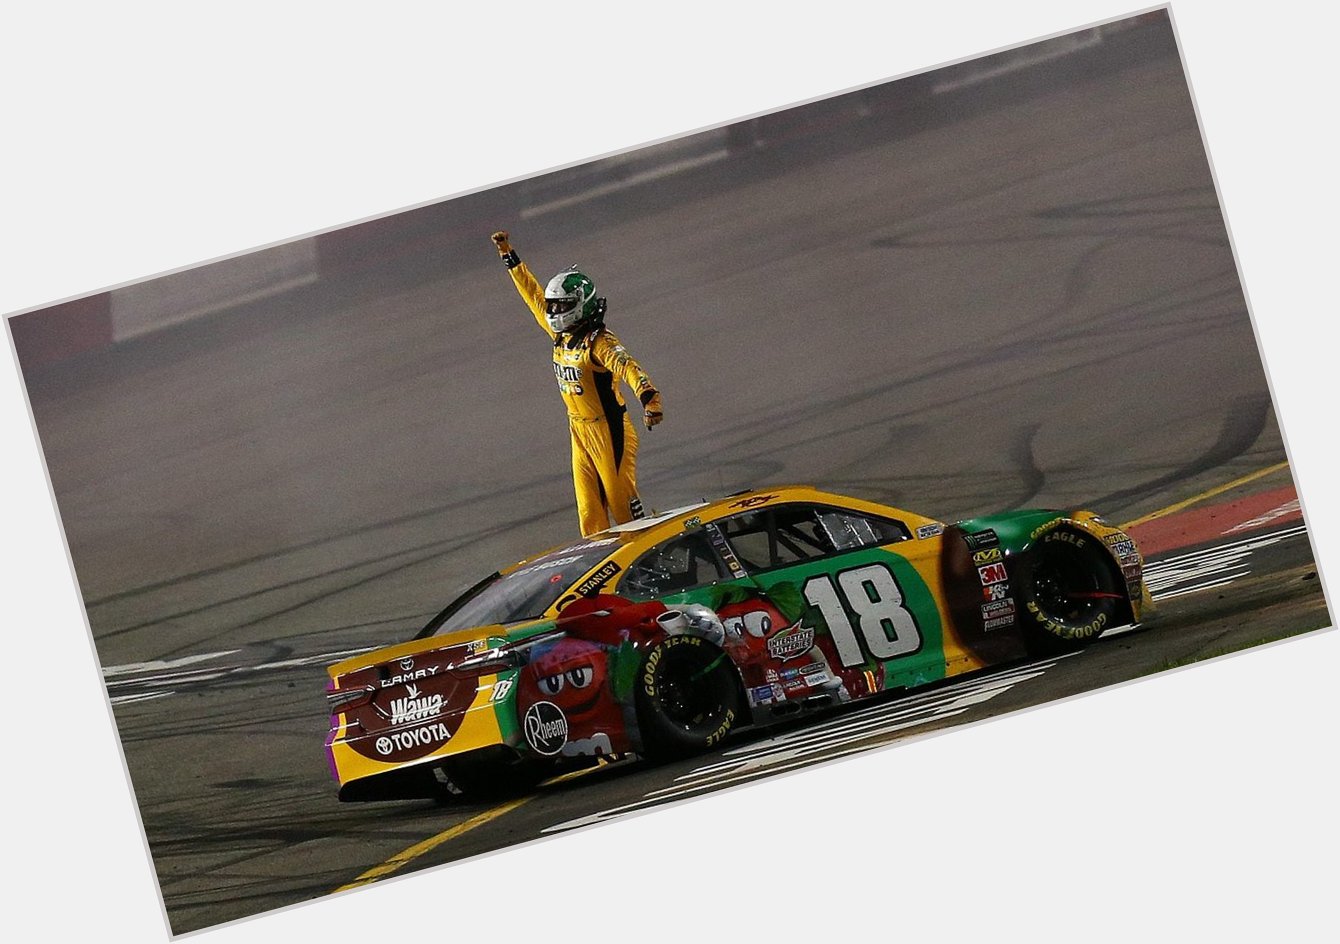 Happy birthday to the greatest driver of all time Kyle Busch 